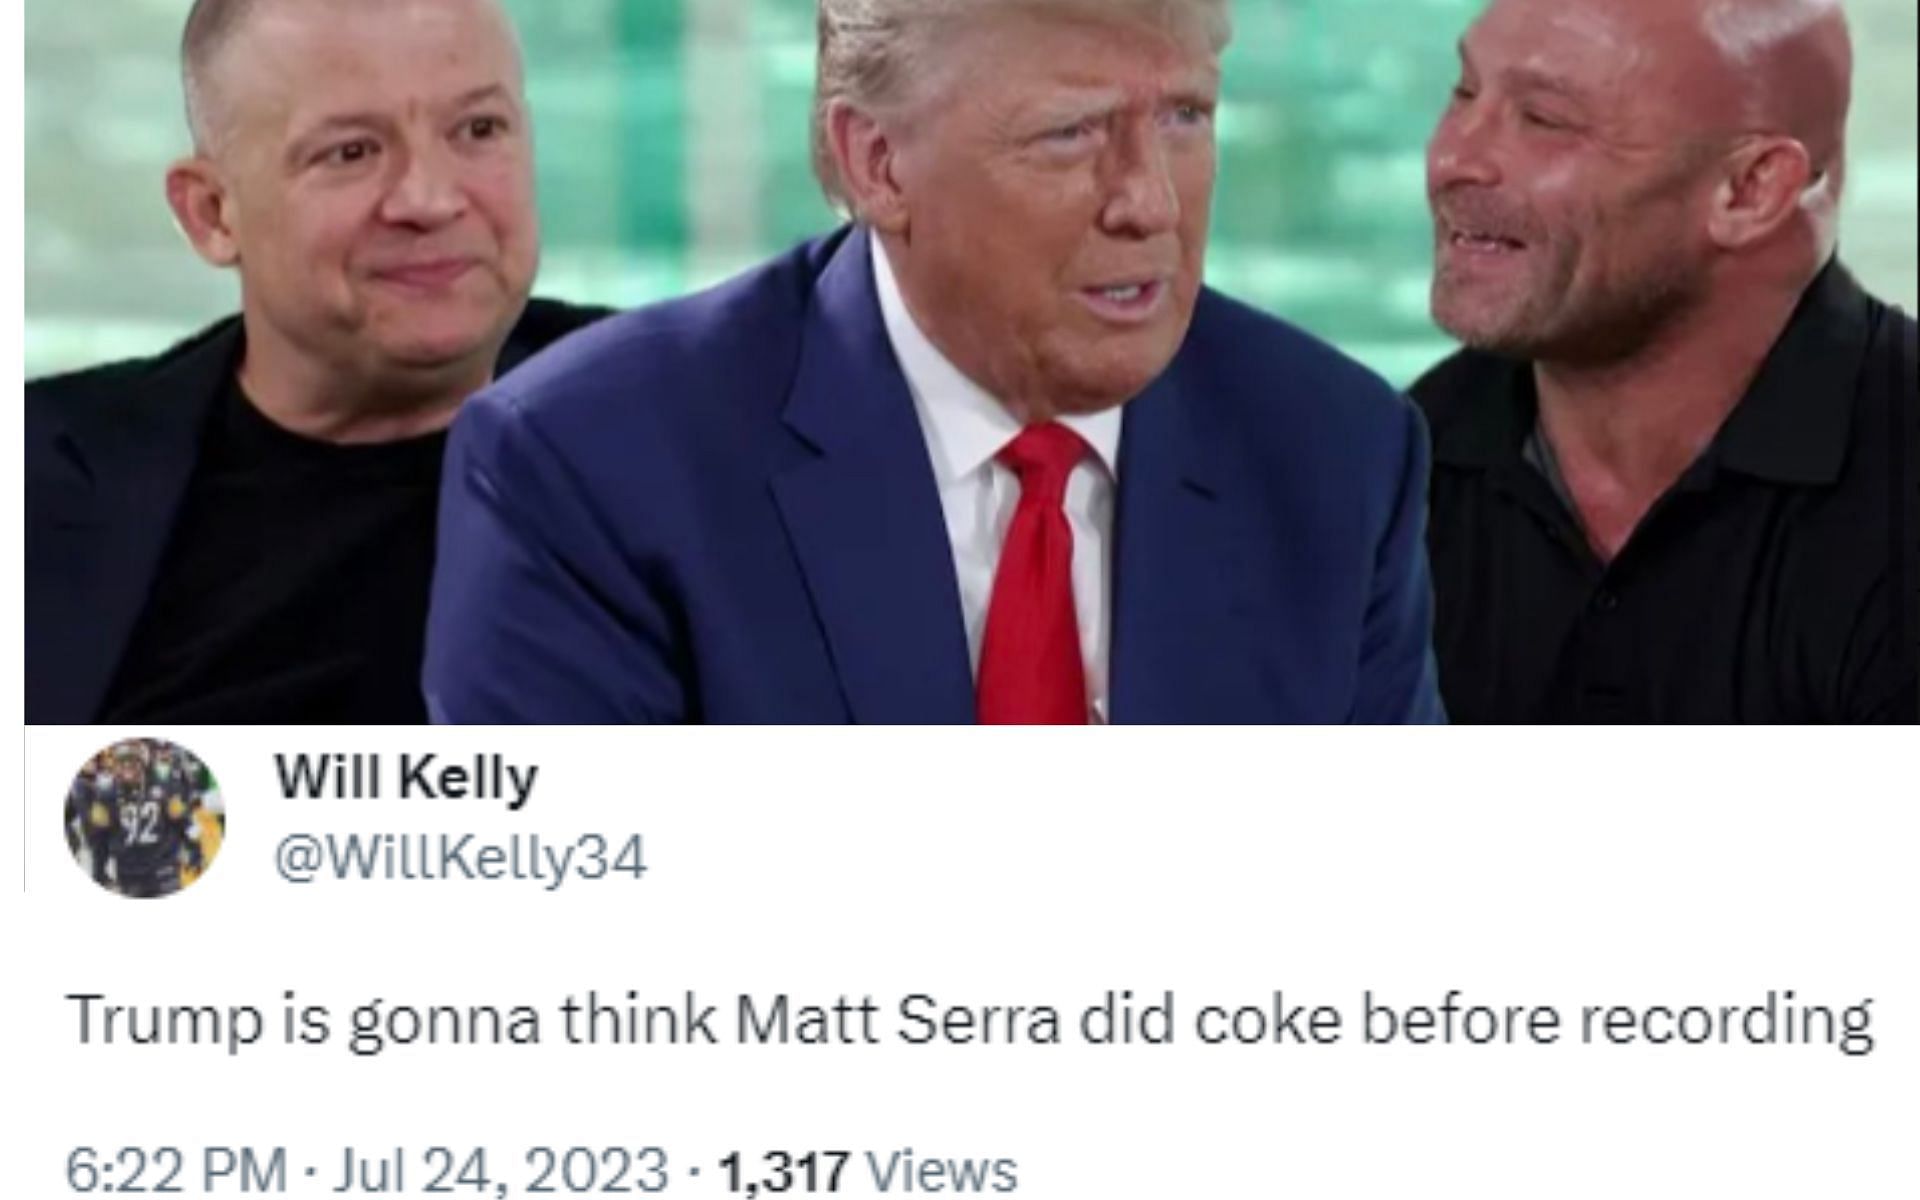 Thumbnail of the promo of the UFC Unfiltered featuring President Trump. [Image source: UFC